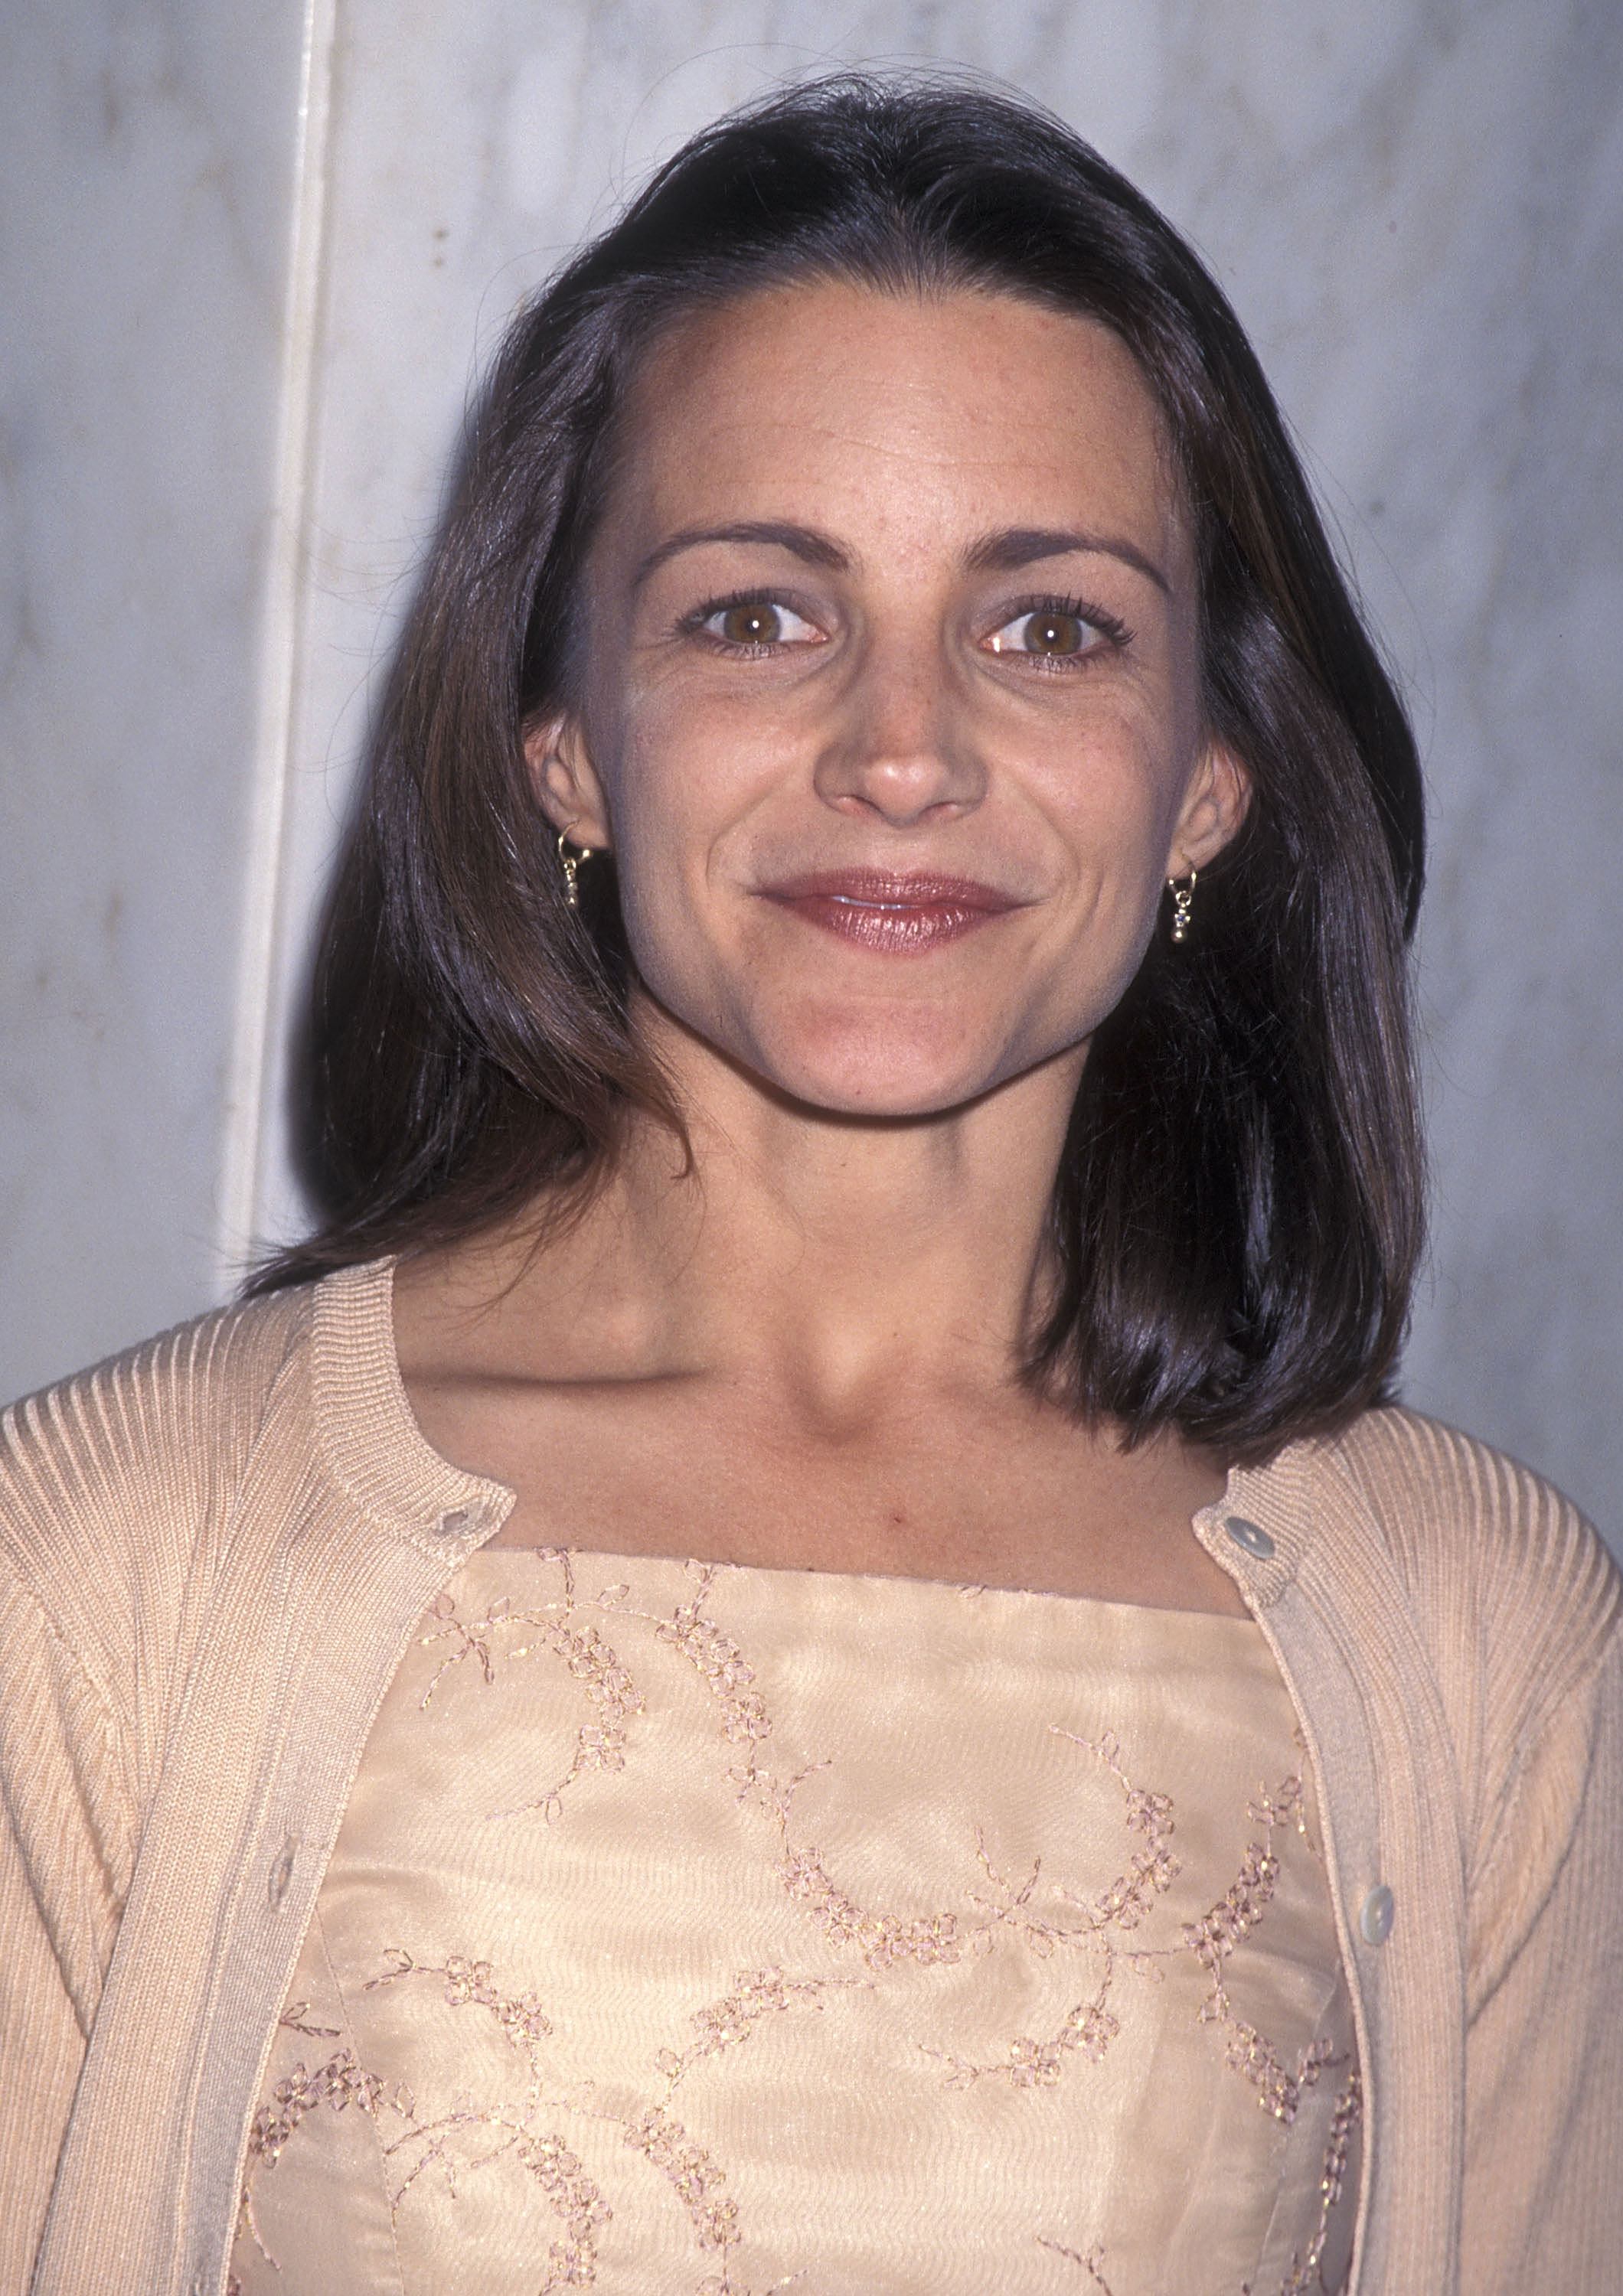 Kristin Davis at the American Oceans Campaign's Fourth Annual Partners Award Salute to Woody Harrelson on April 9, 1997 in California. | Source: Getty Images